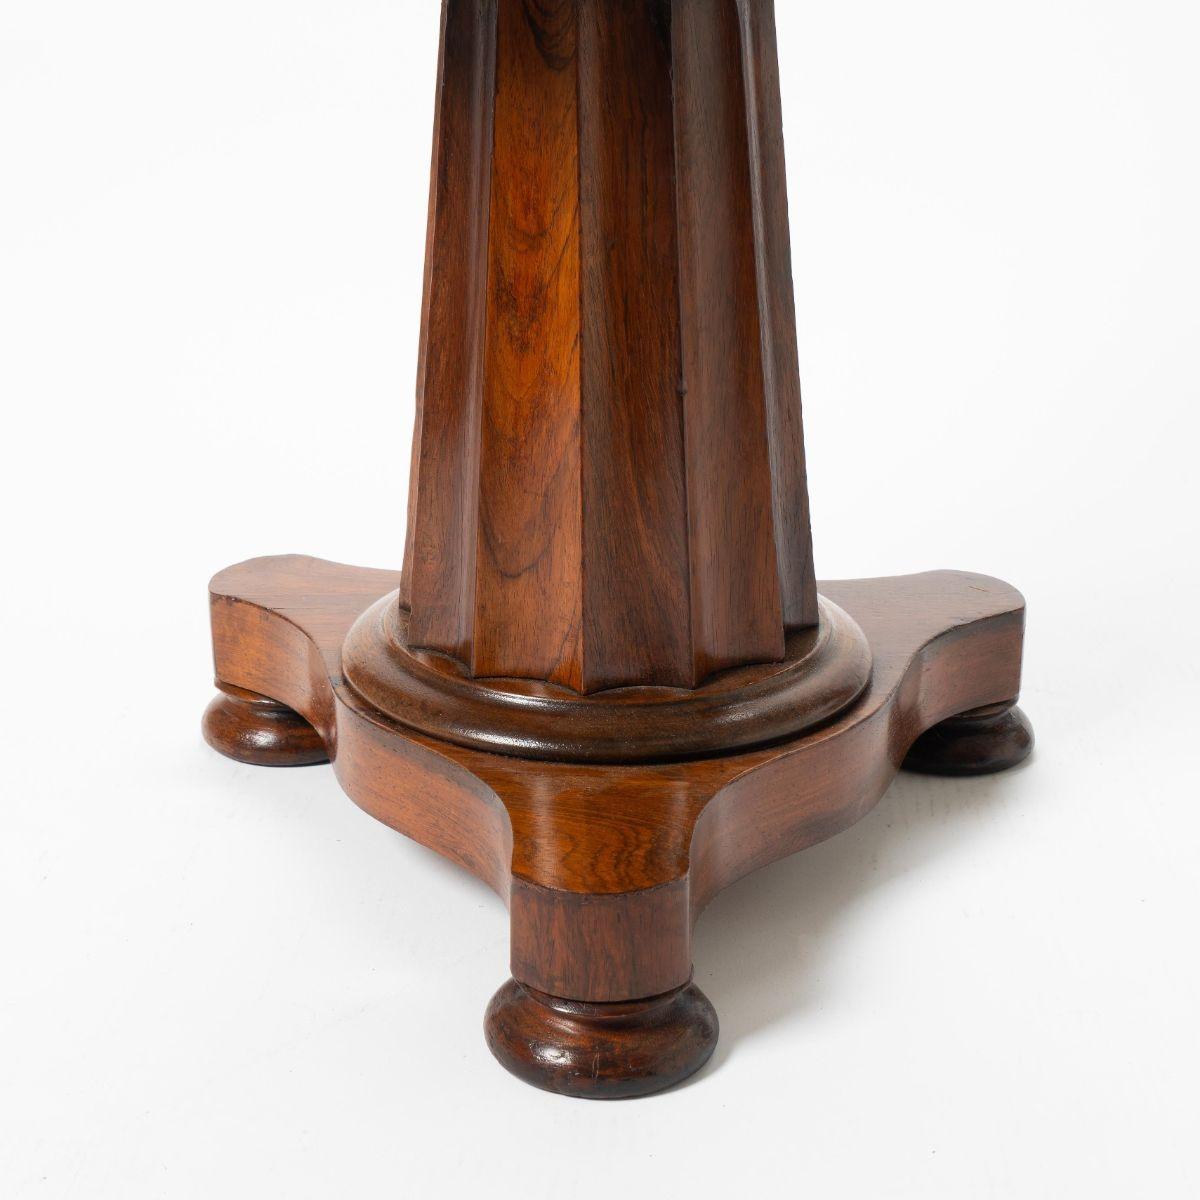 American Neoclassic Upholstered Rosewood Pedestal Piano Stool, c. 1830 In Good Condition For Sale In Kenilworth, IL